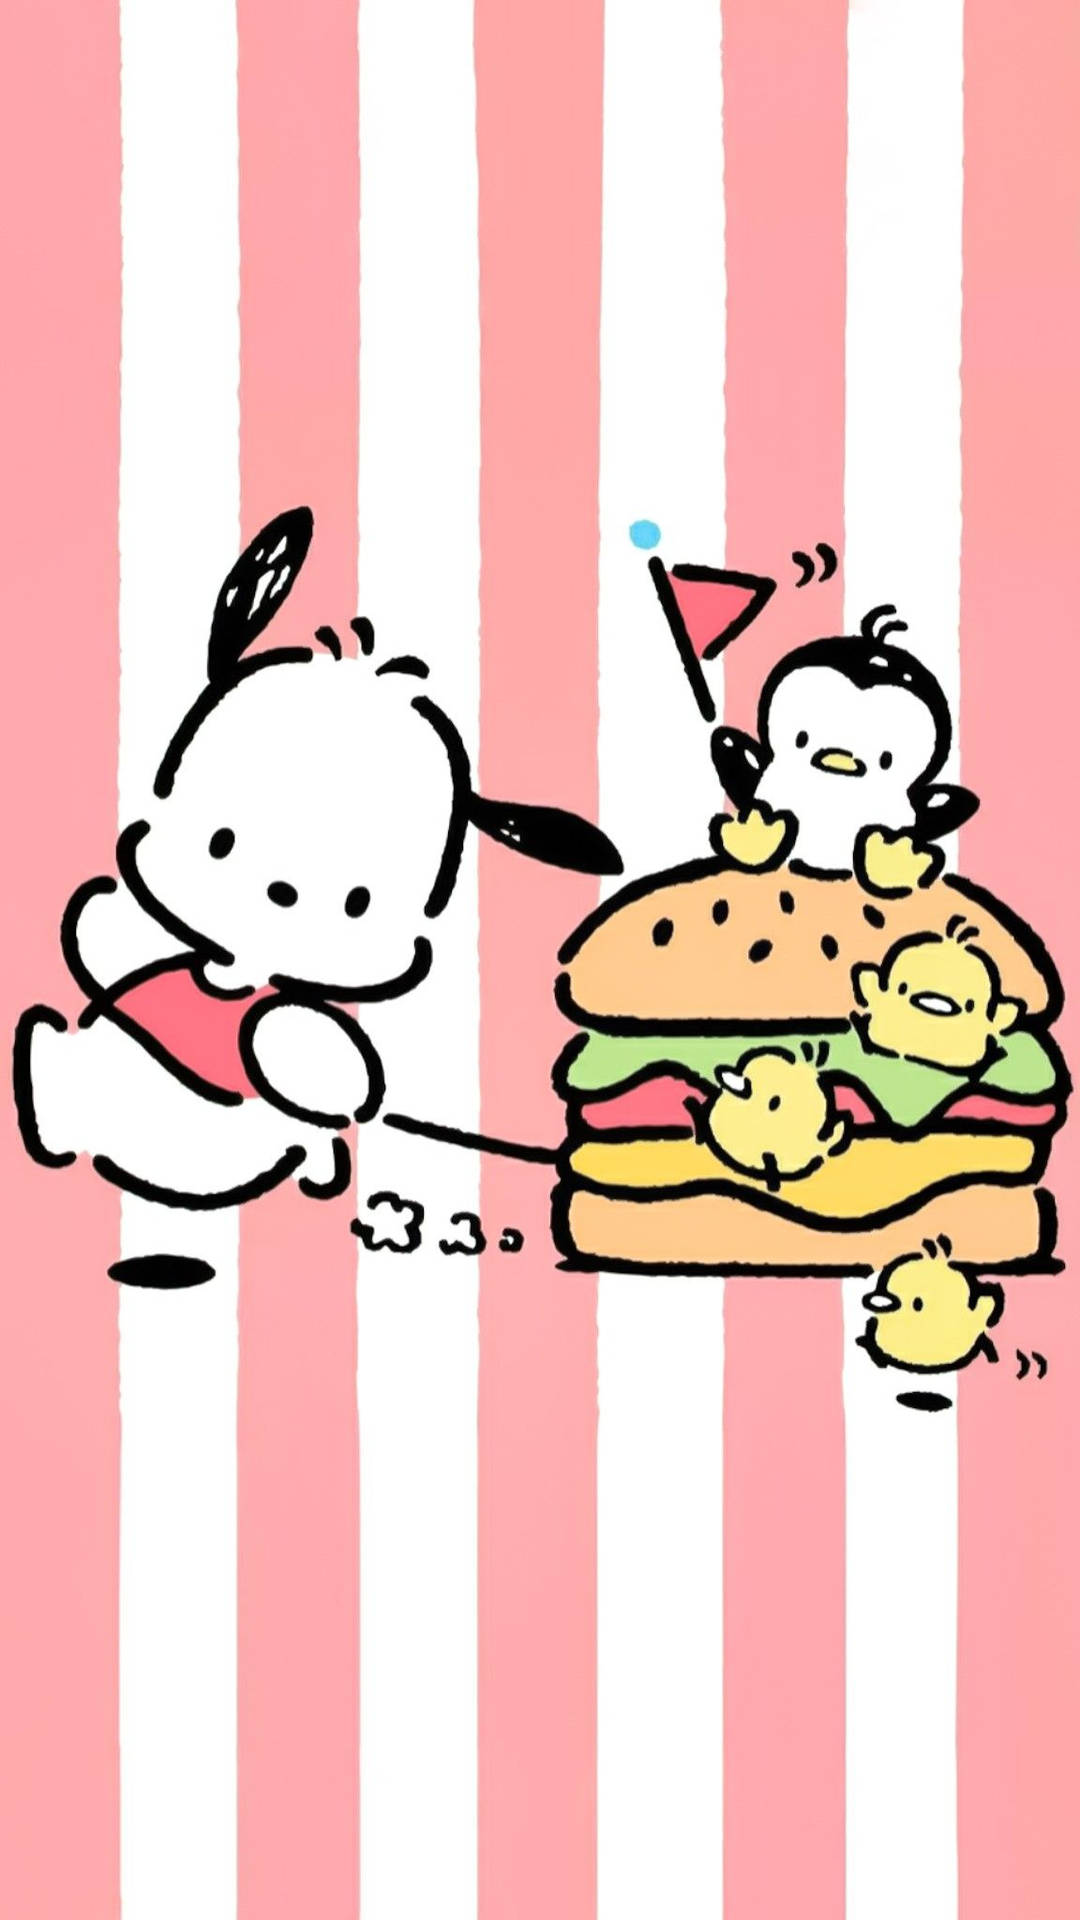 Top 999 Sanrio Characters Wallpaper Full HD 4K Free To Use